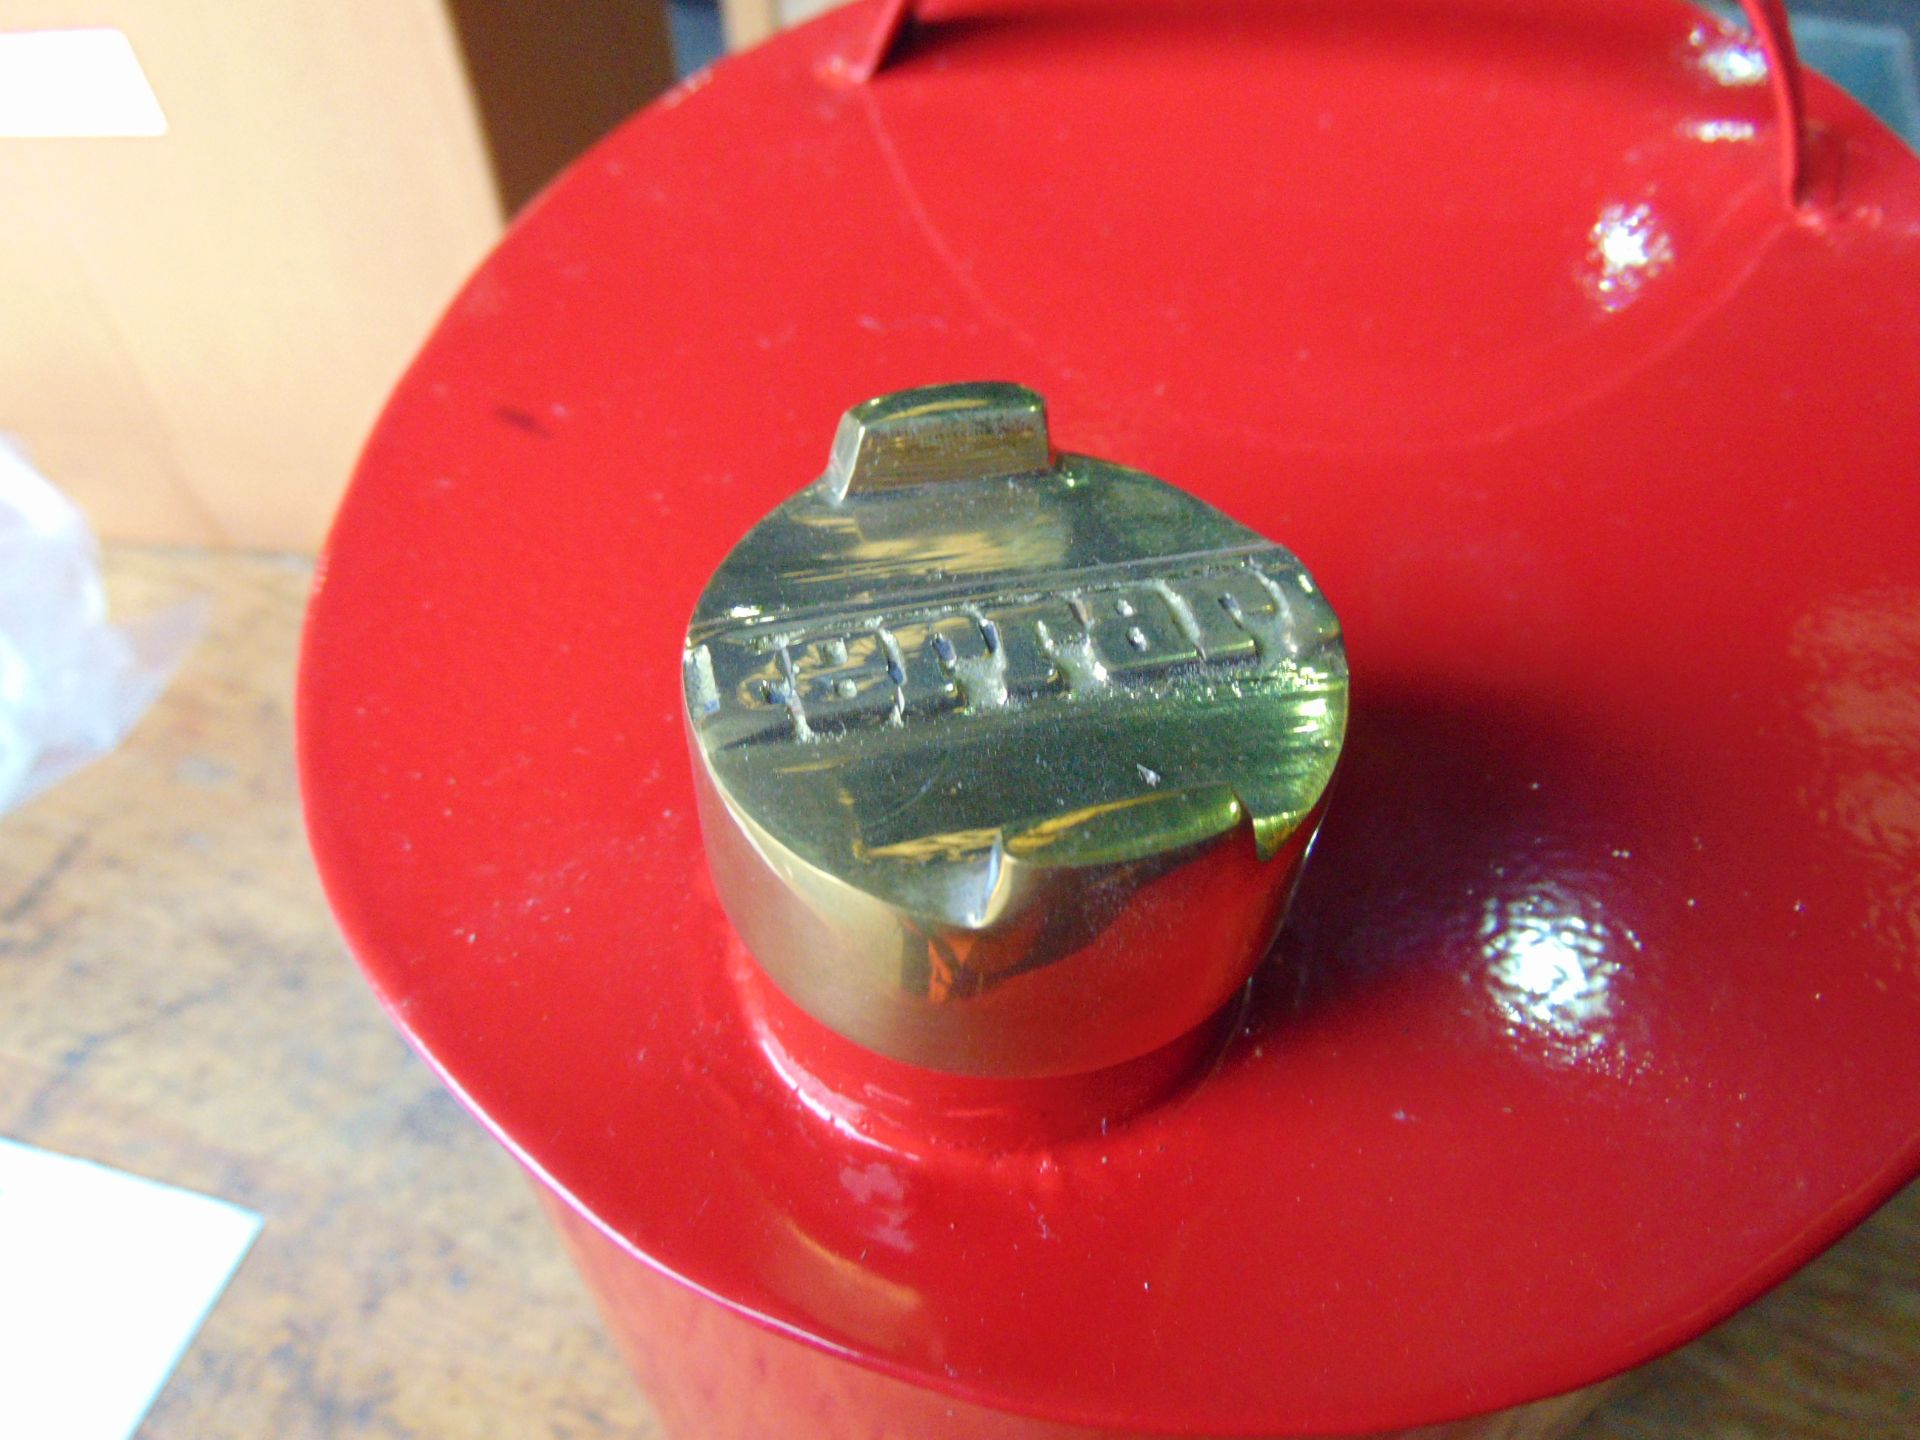 Ferrari Hand Painted 1 Gall Fuel/Oil Can with Brass Cap - Image 3 of 5